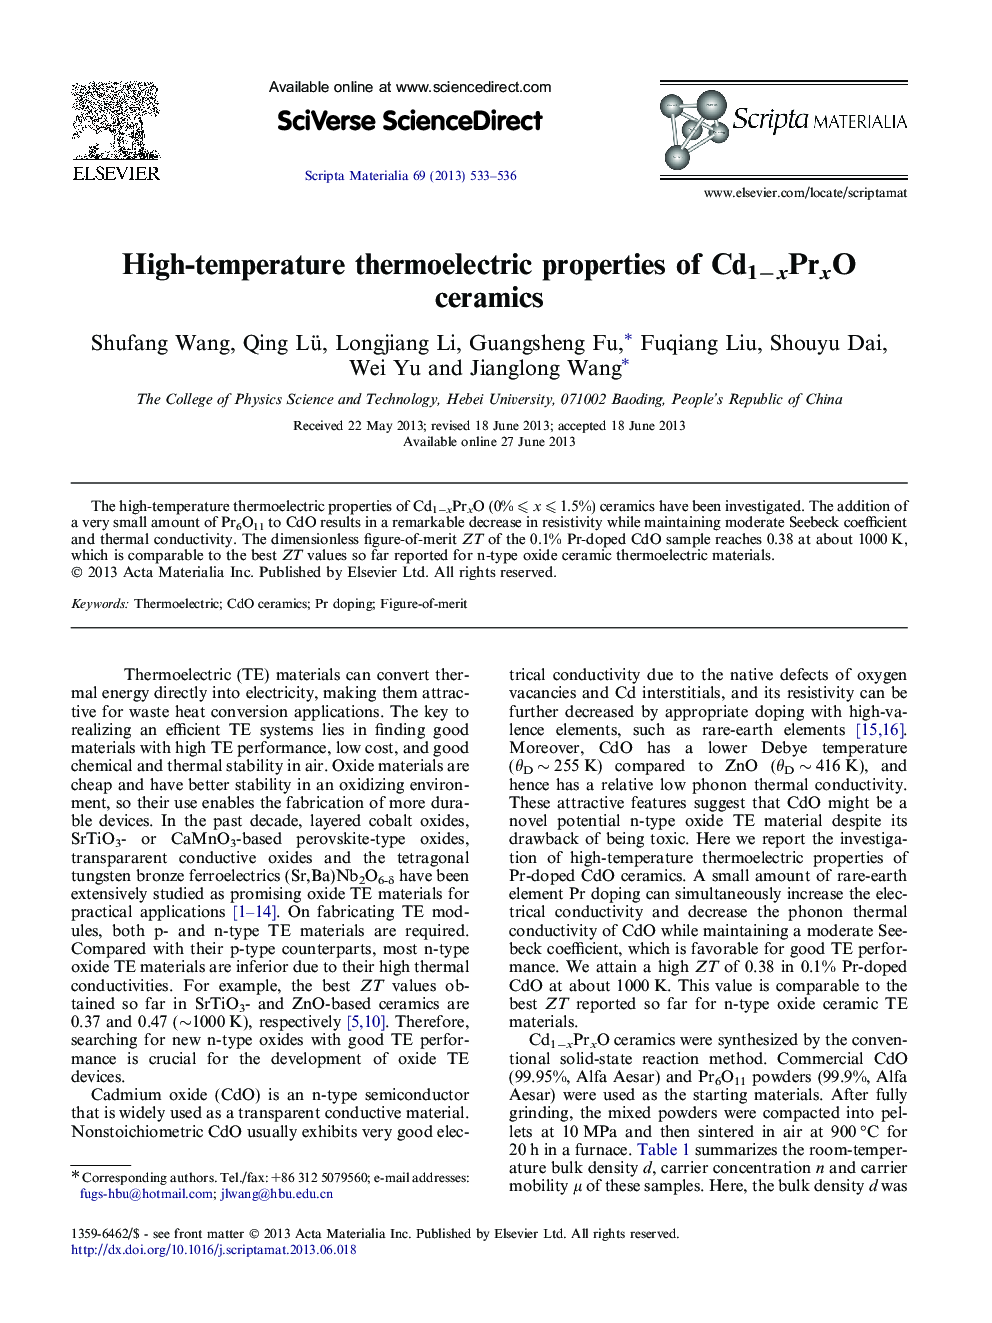 High-temperature thermoelectric properties of Cd1âxPrxO ceramics